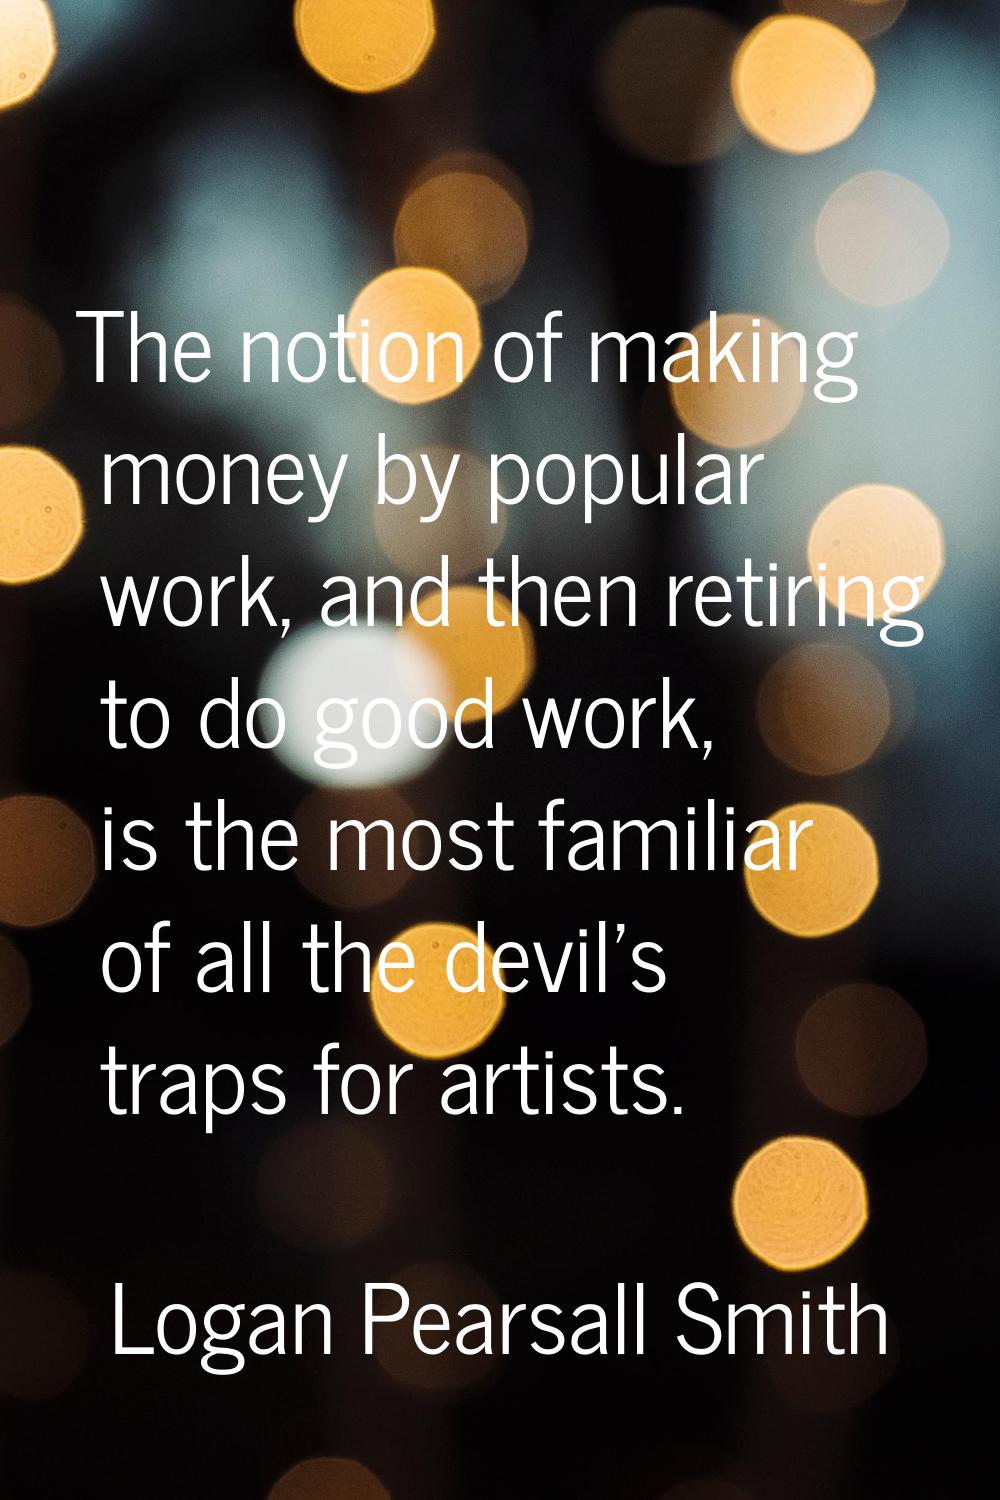 The notion of making money by popular work, and then retiring to do good work, is the most familiar